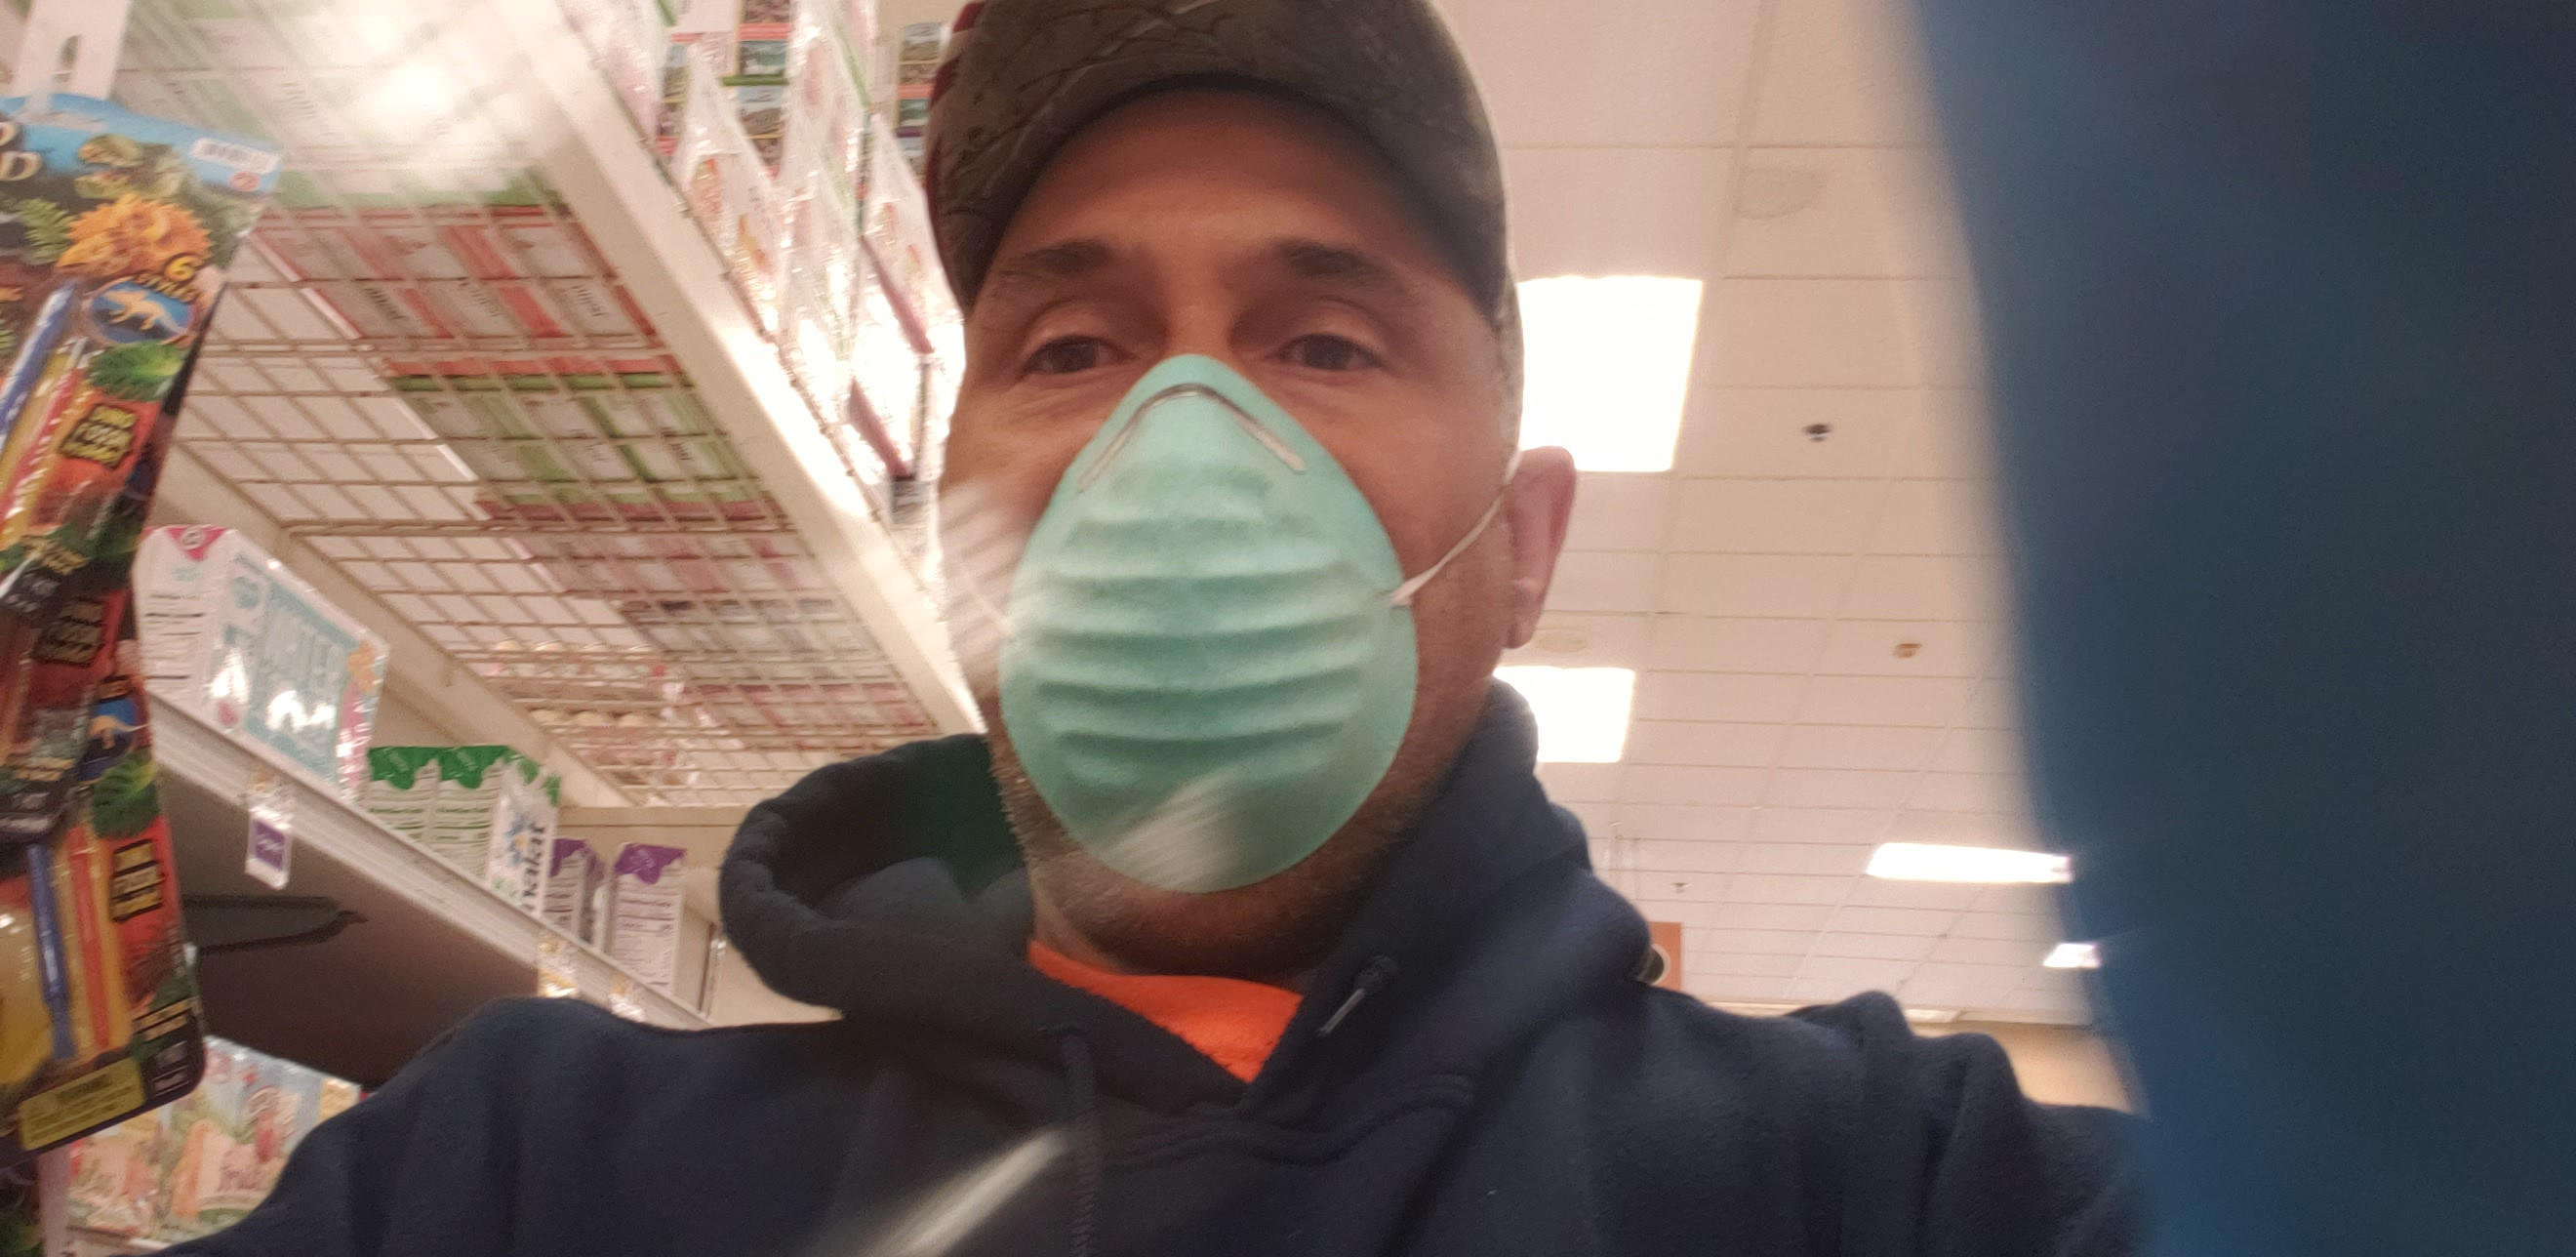 A man with a hat and a mask inside of a store.